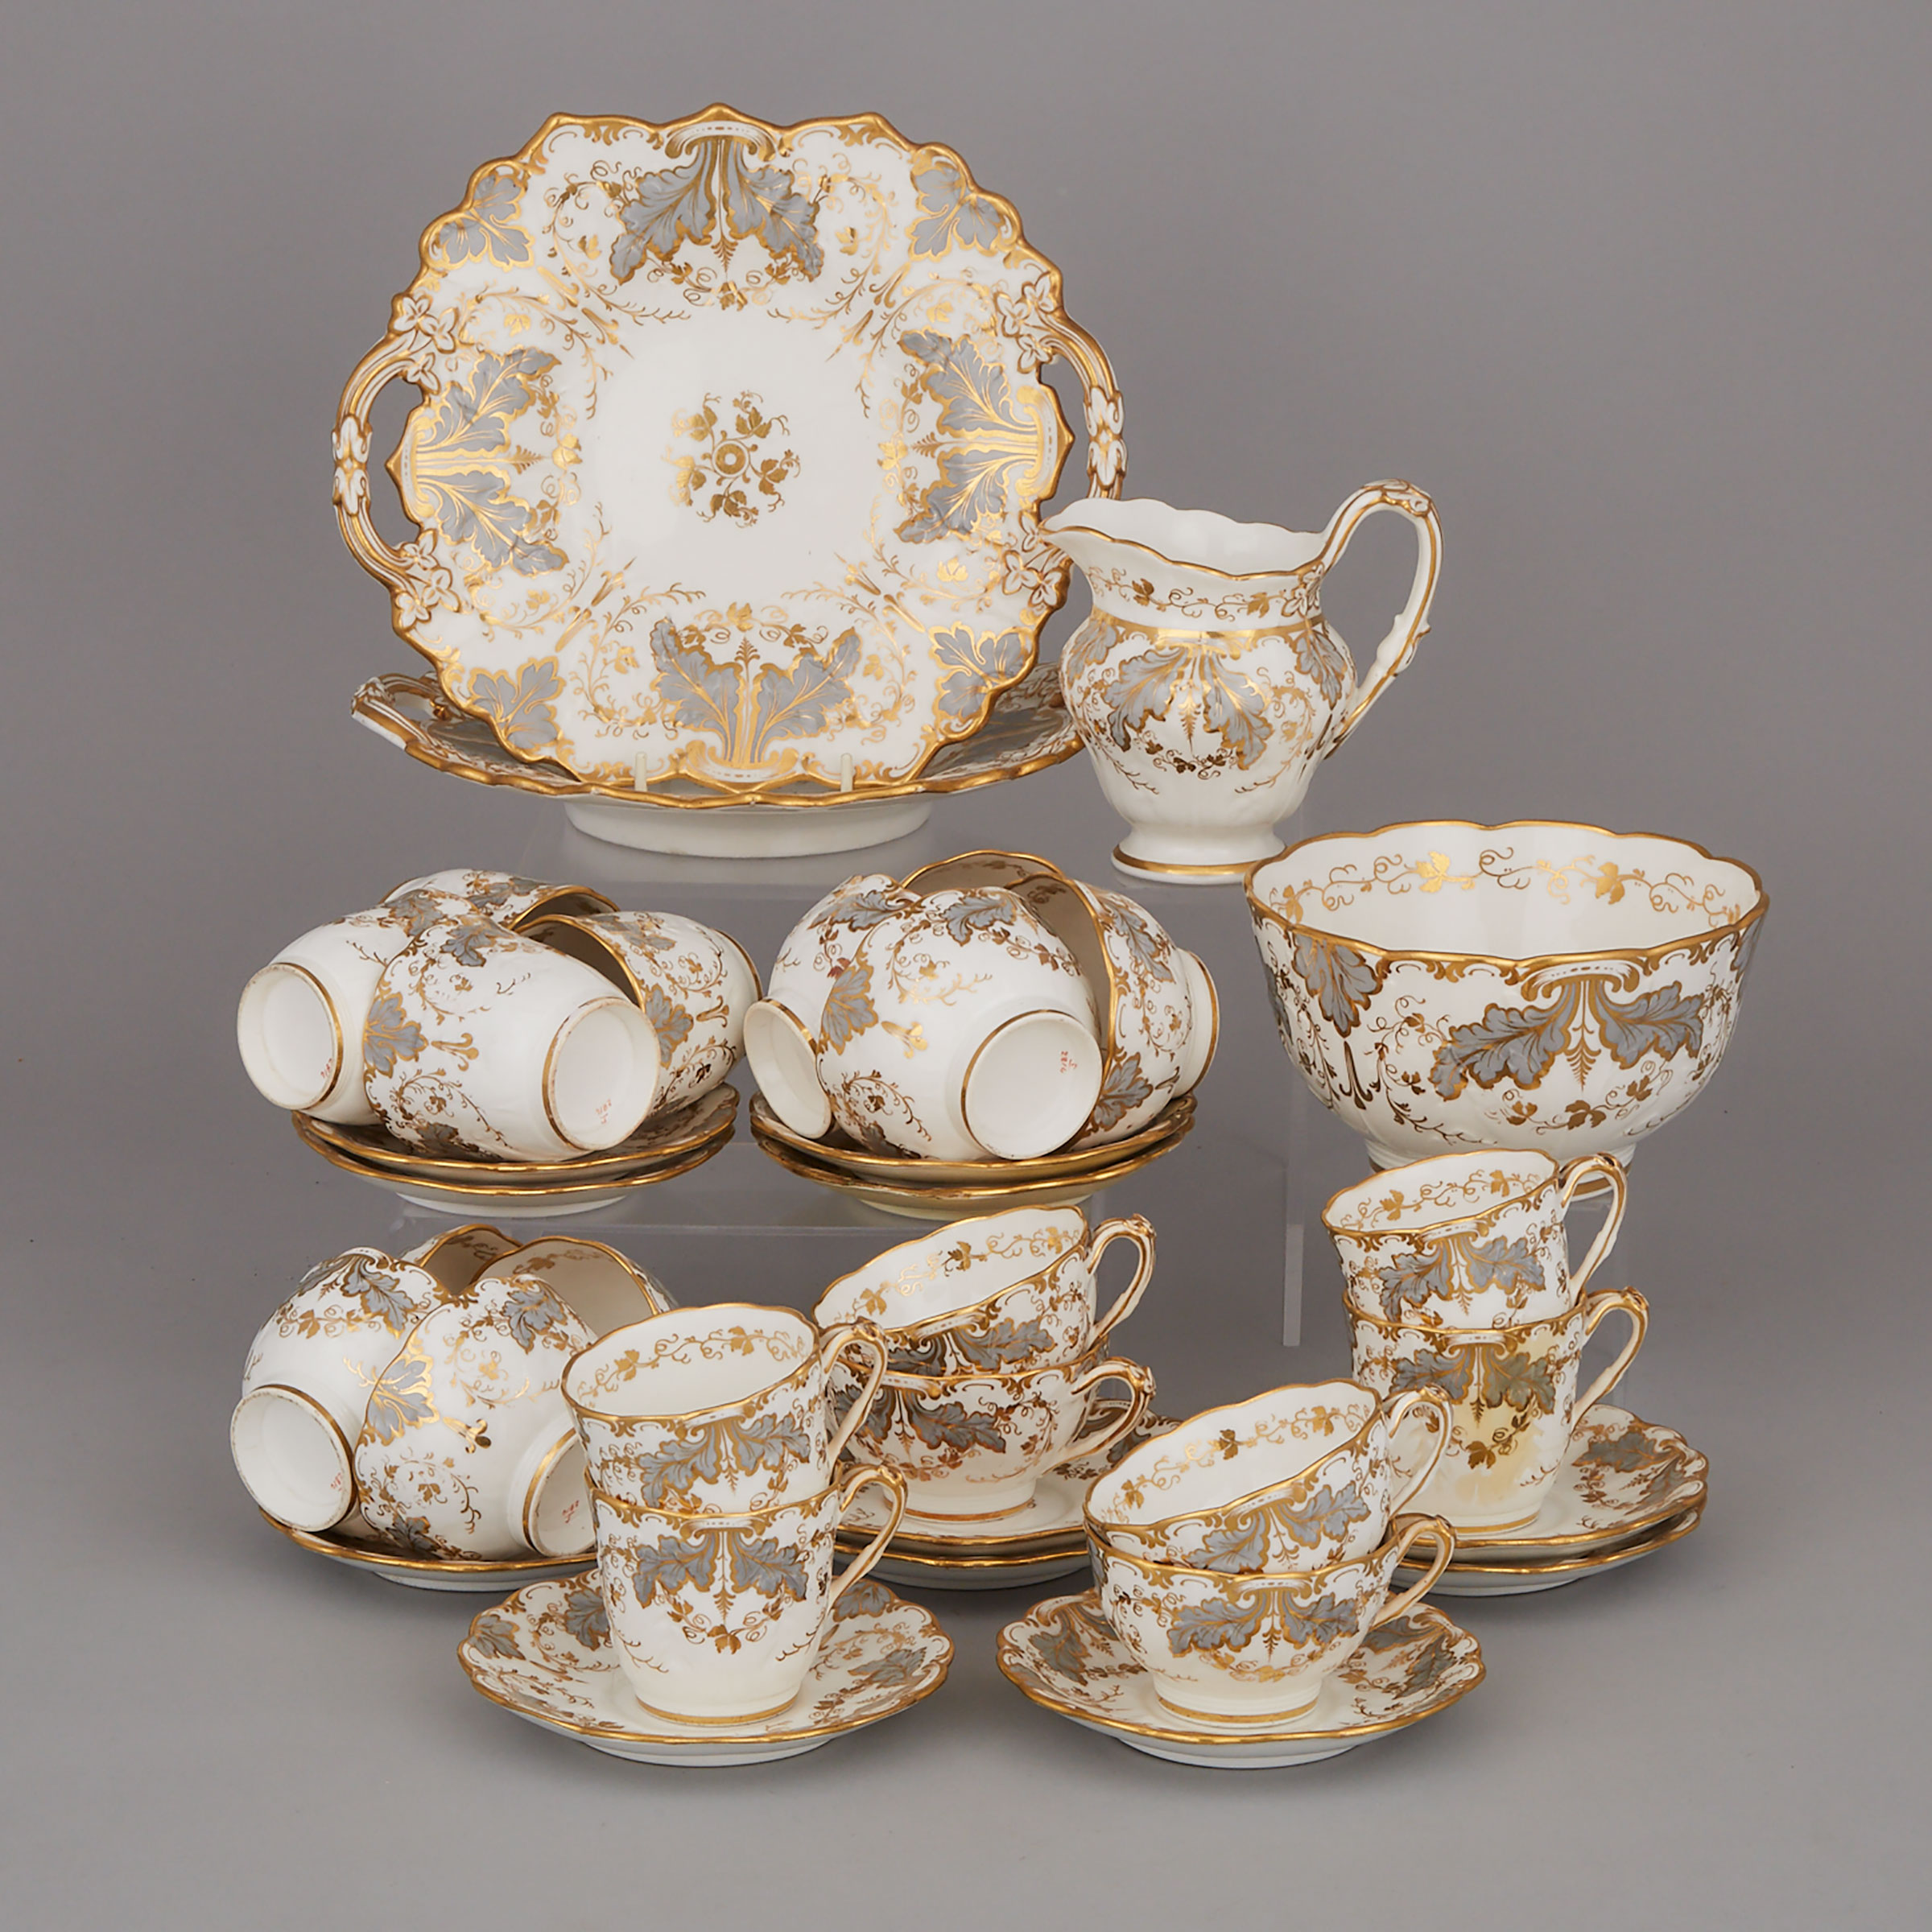 English Porcelain Grey and Gilt Decorated Part Service, mid-19th century